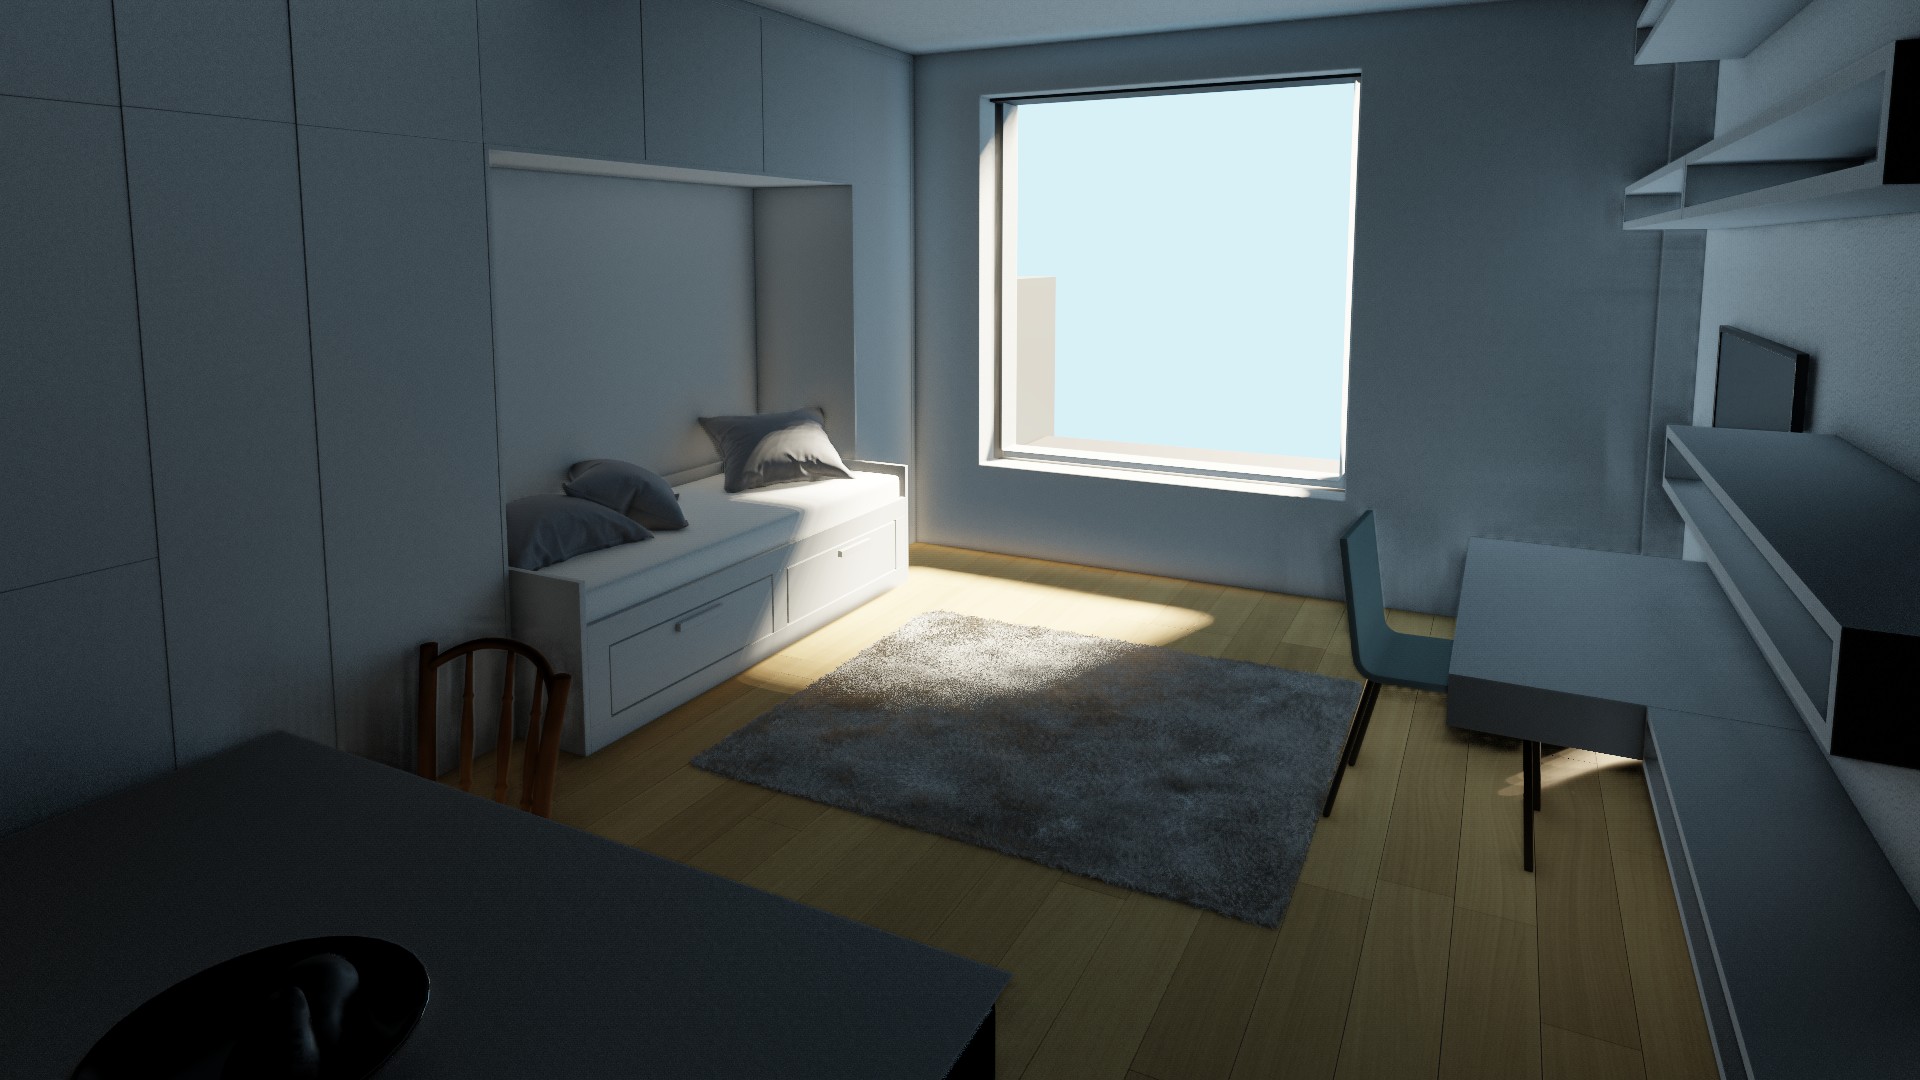 More screen space global illumination with EEVEE - Blender Tests Blender Artists Community